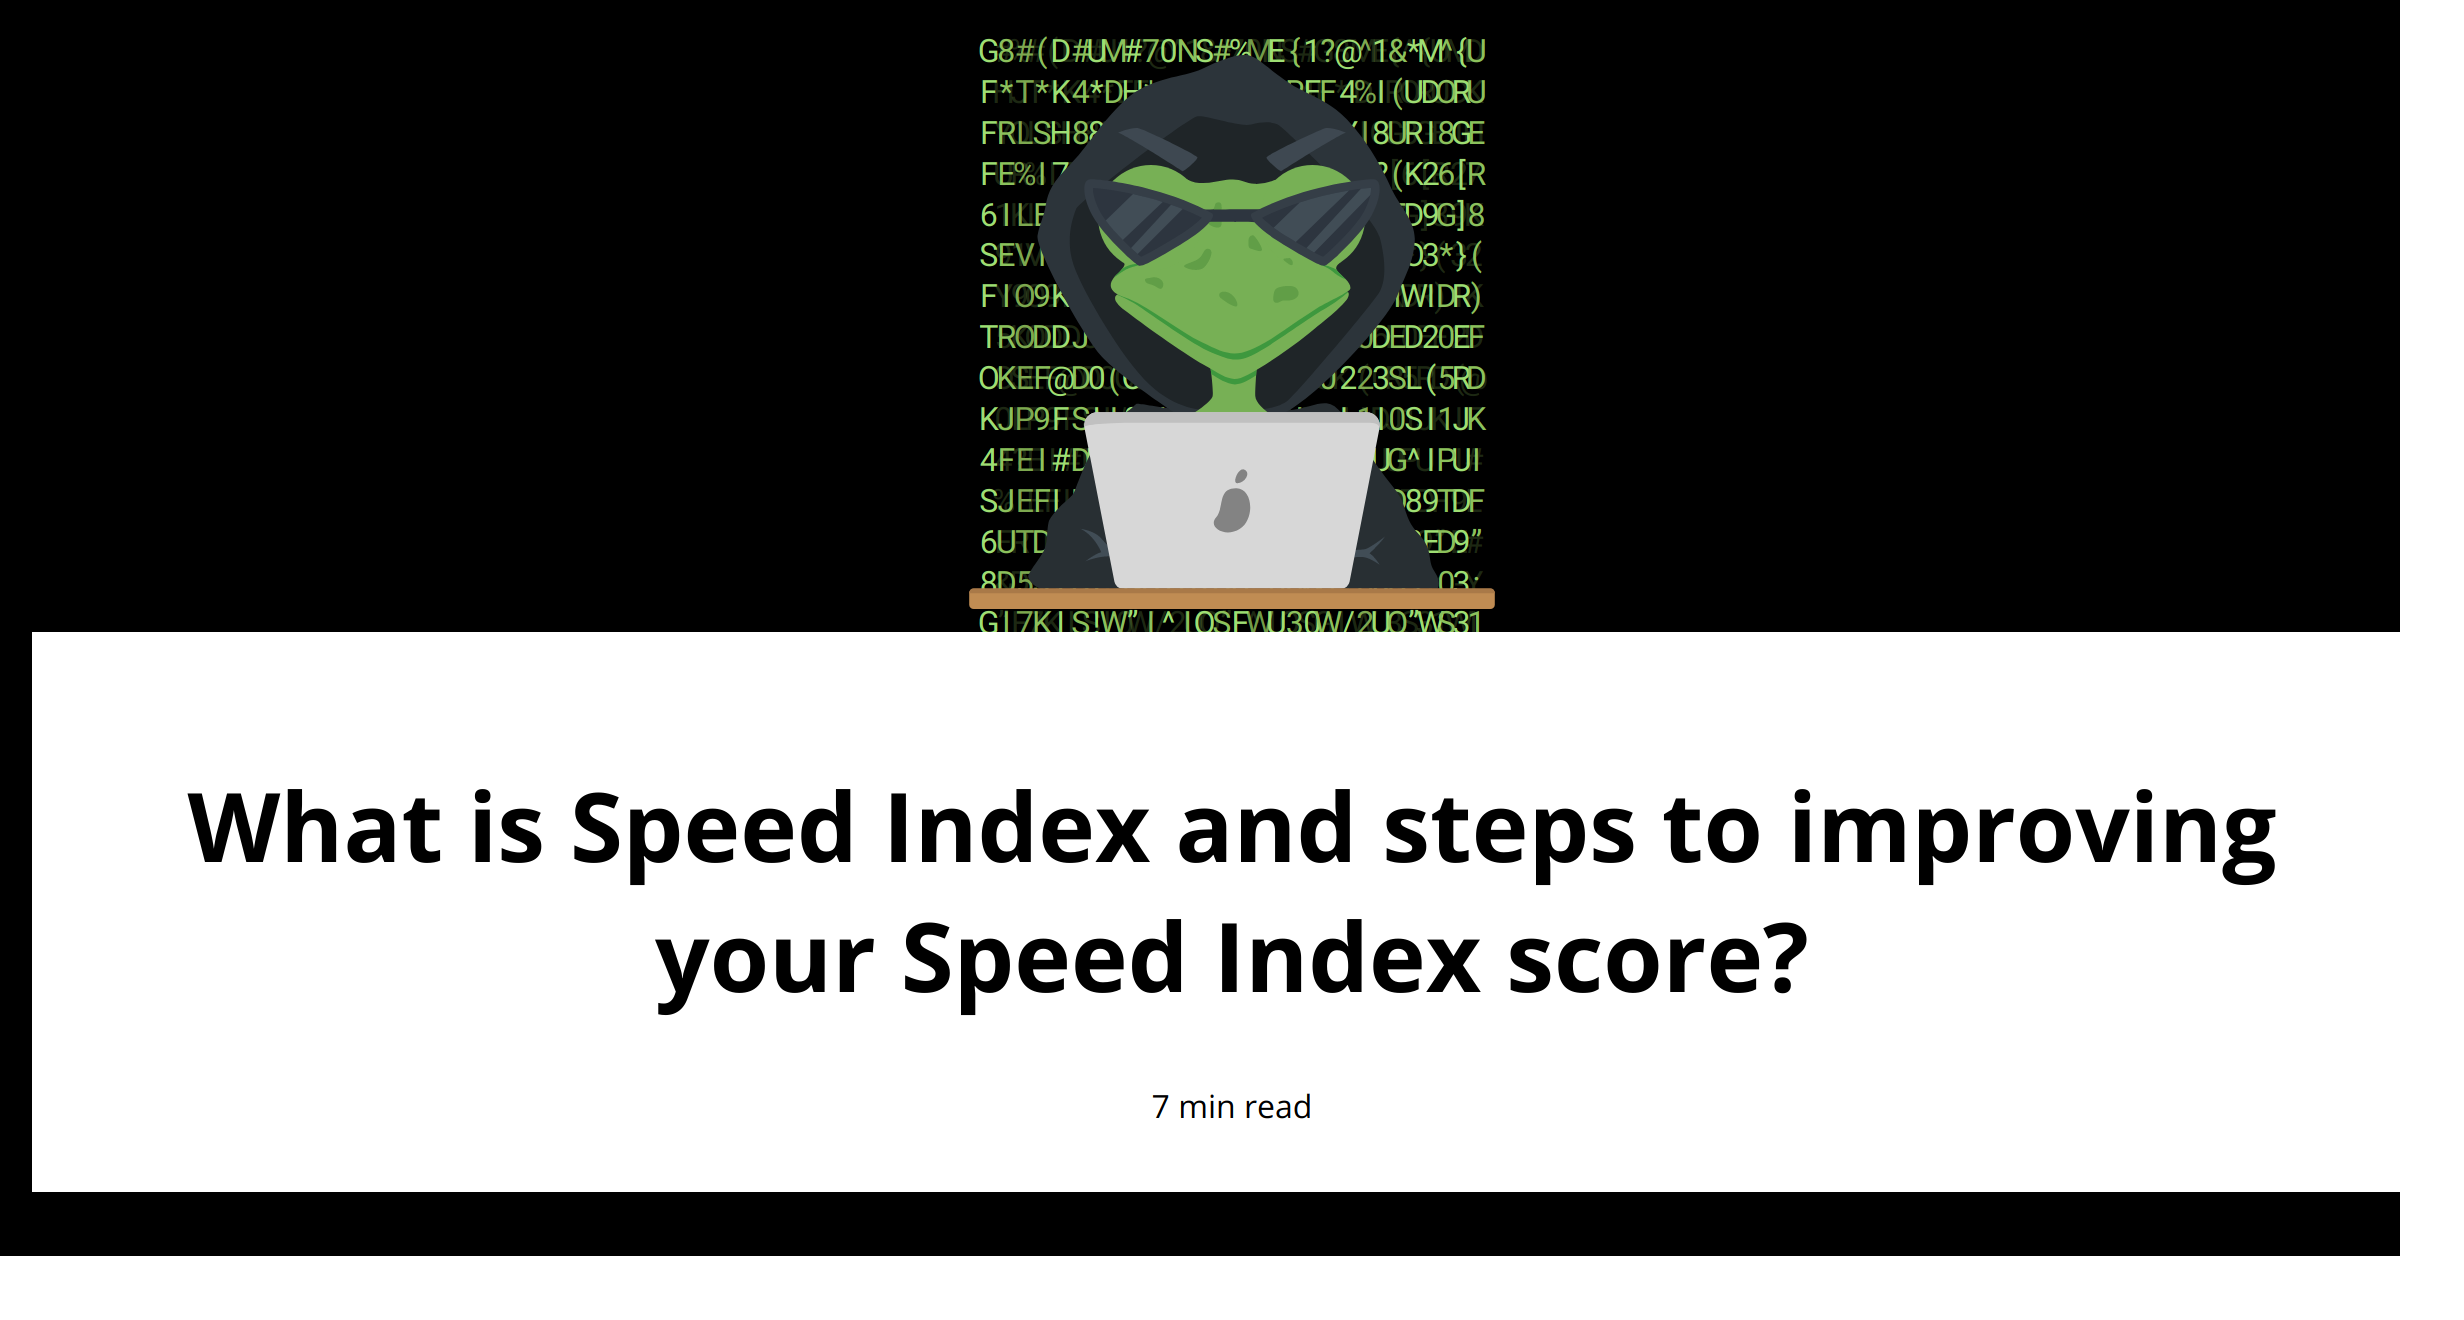 What is Speed Index and steps to improving your Speed Index score?